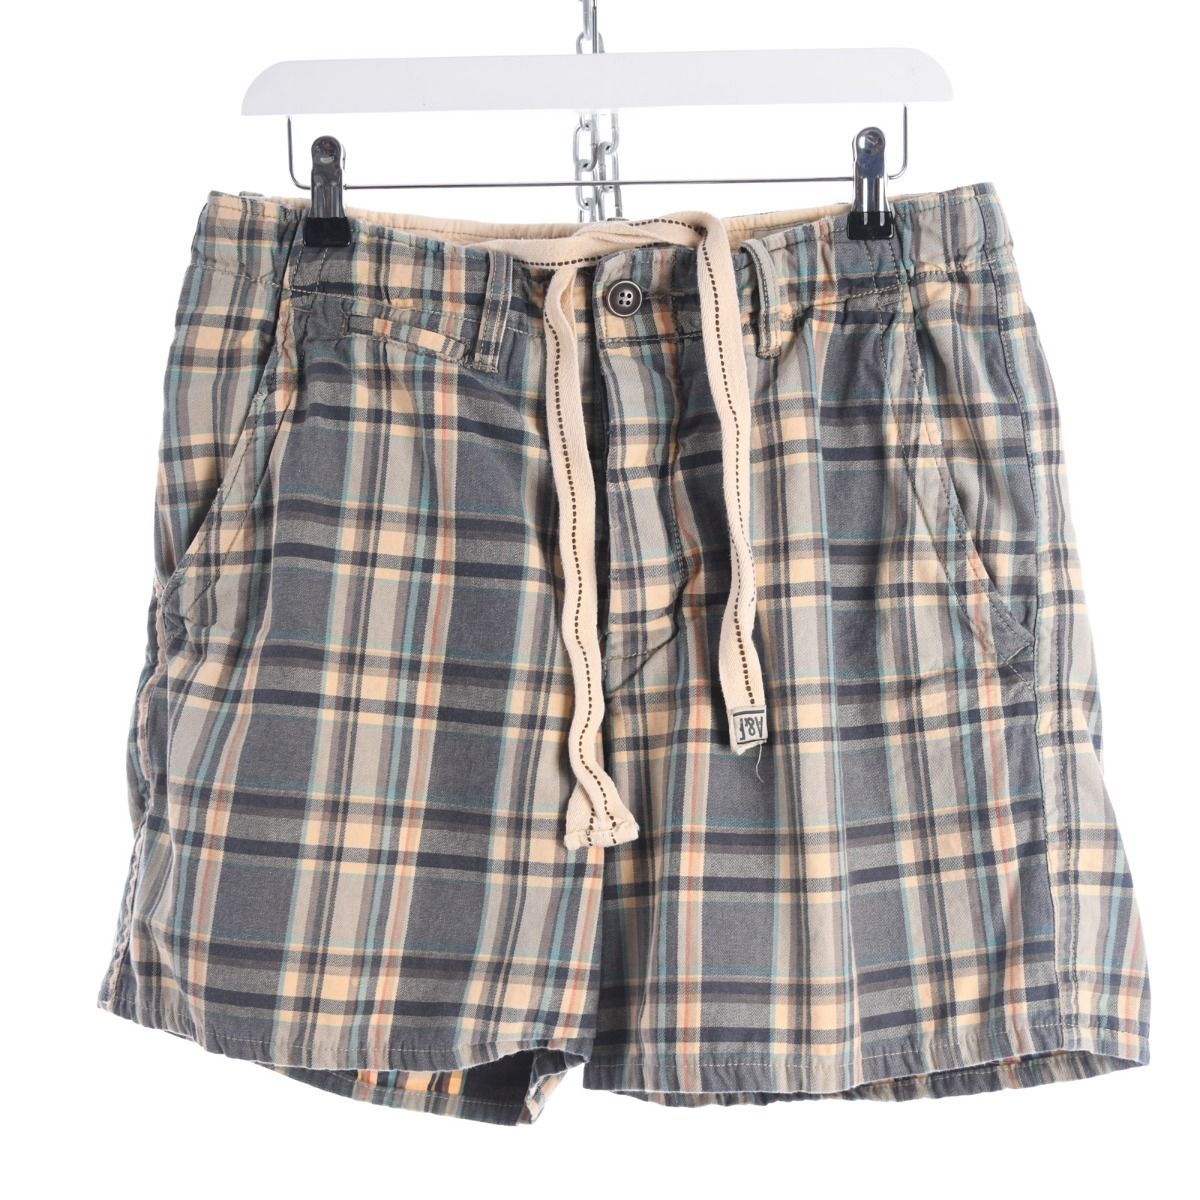 Abercrombie & Fitch Checkered Shorts